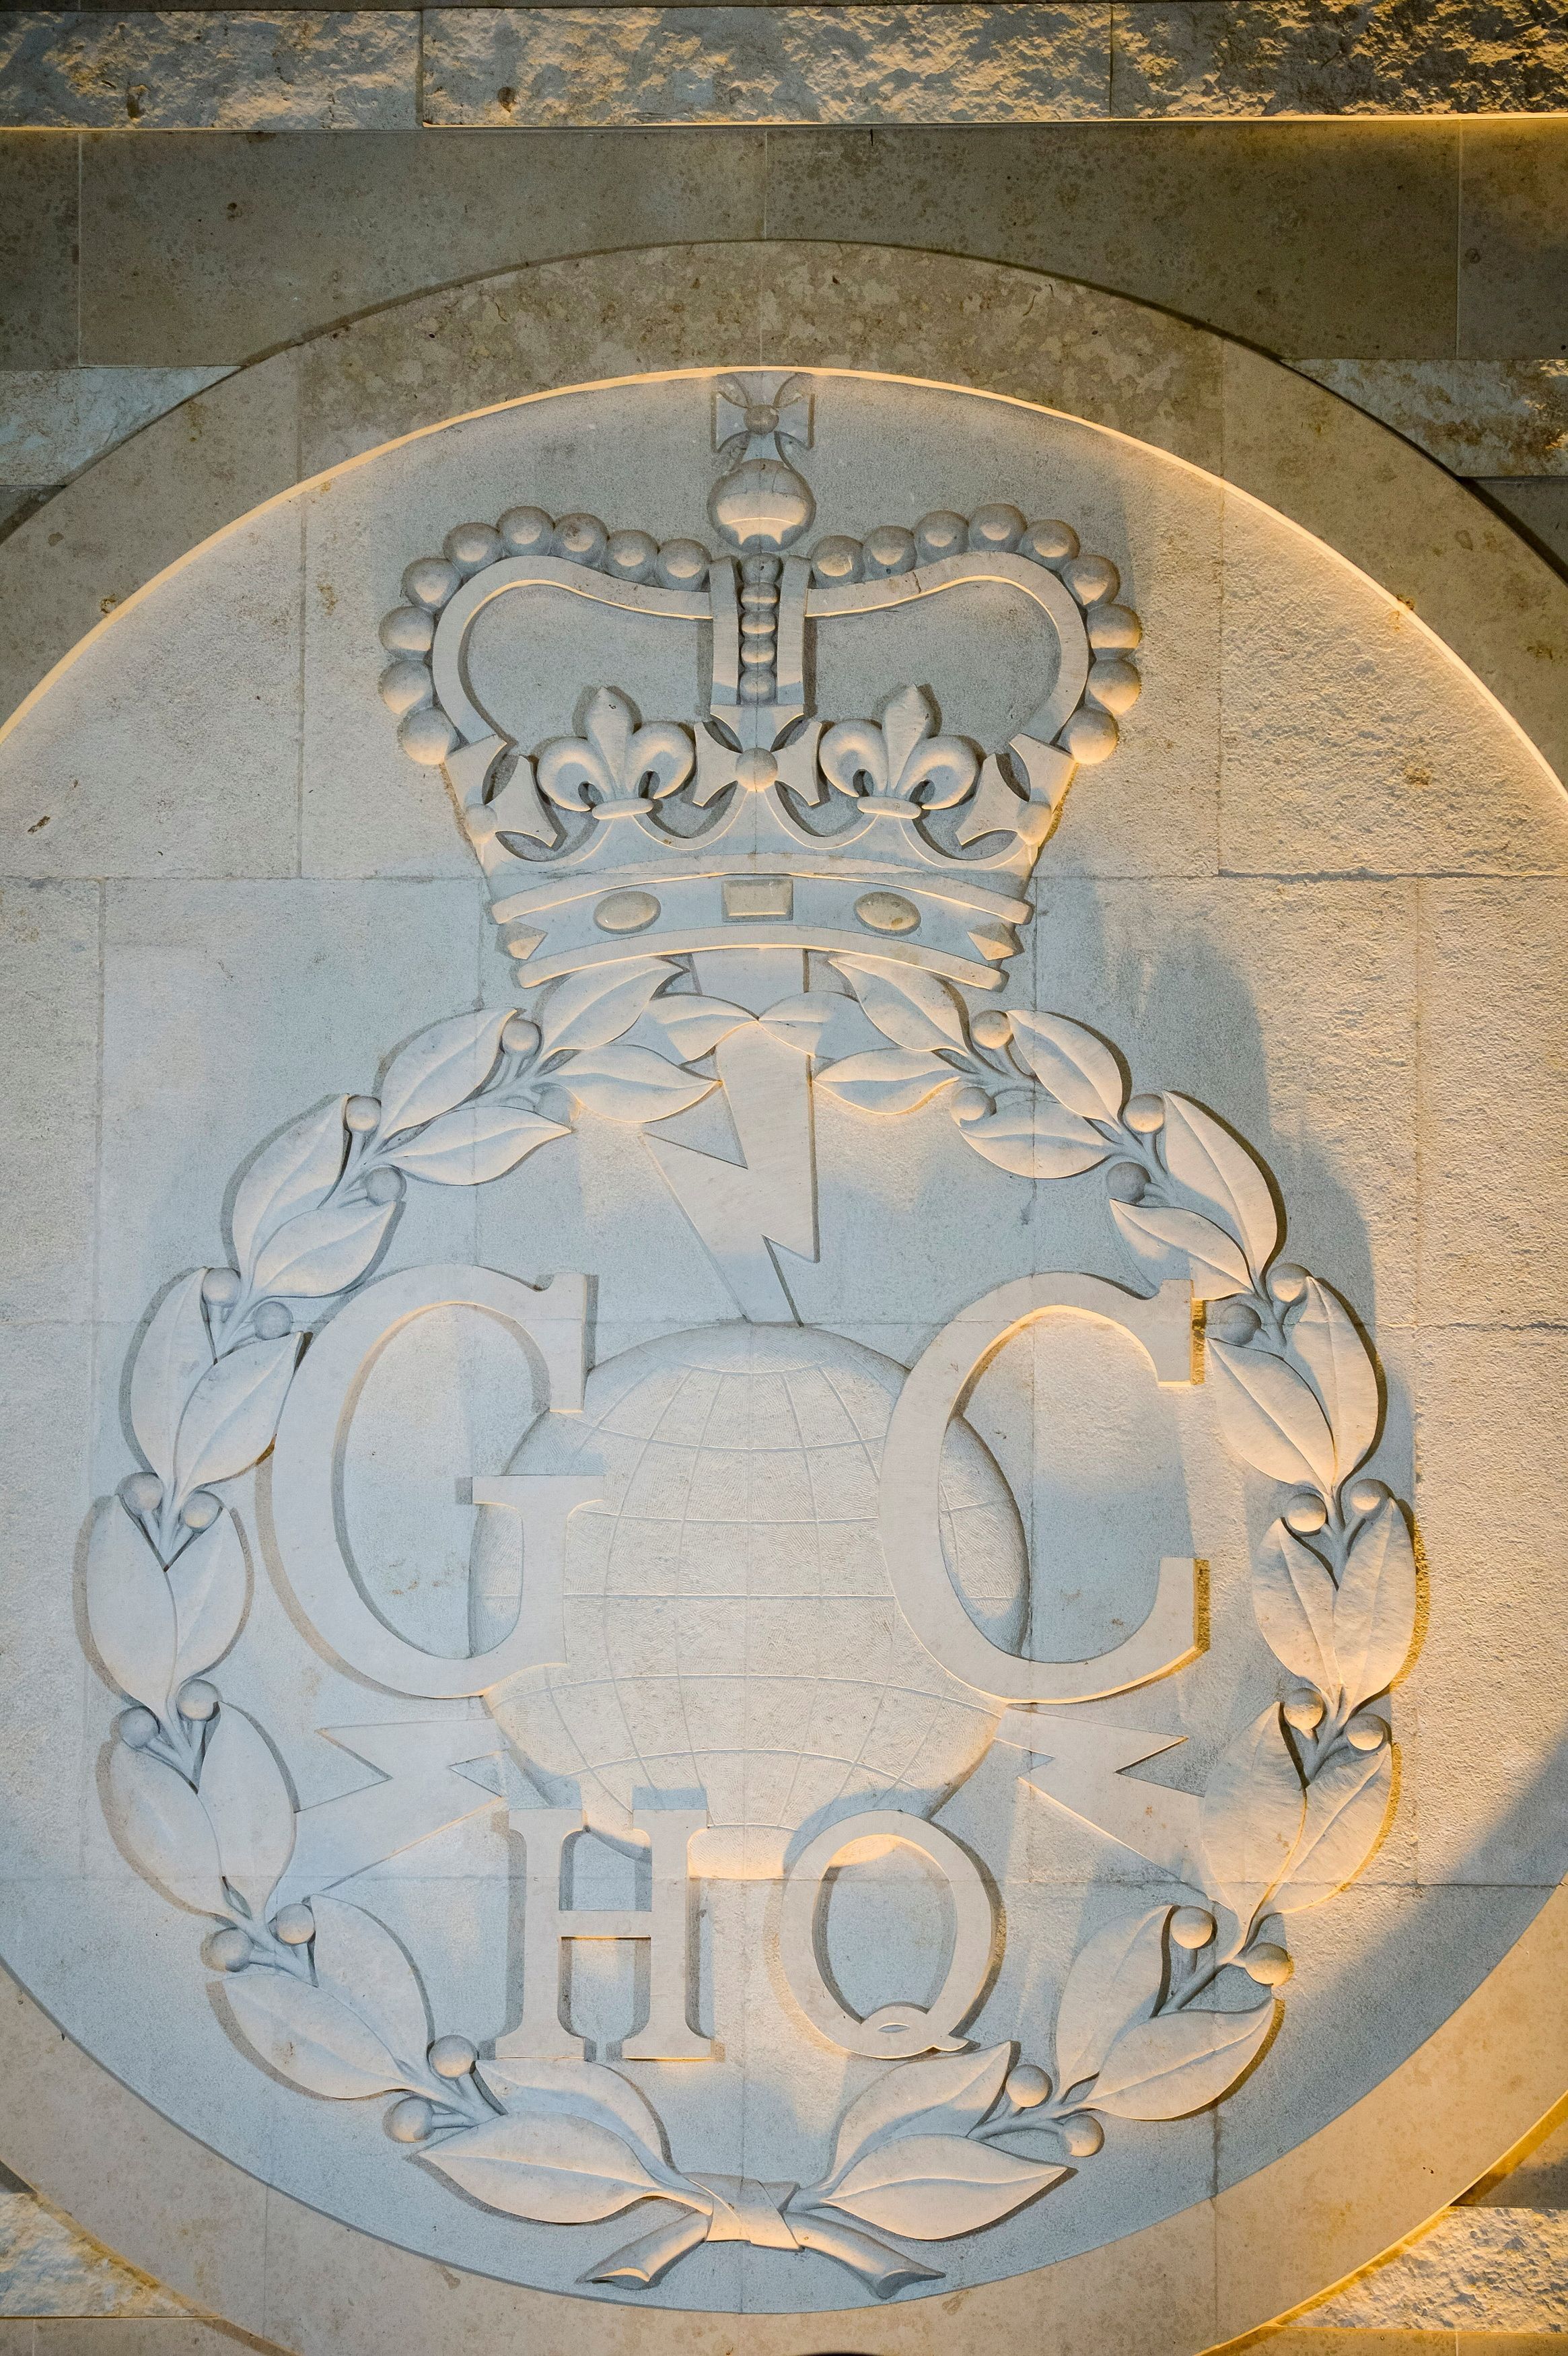 A GCHQ logo on a wall inside Britain's Government Communication Headquarters, in Cheltenham